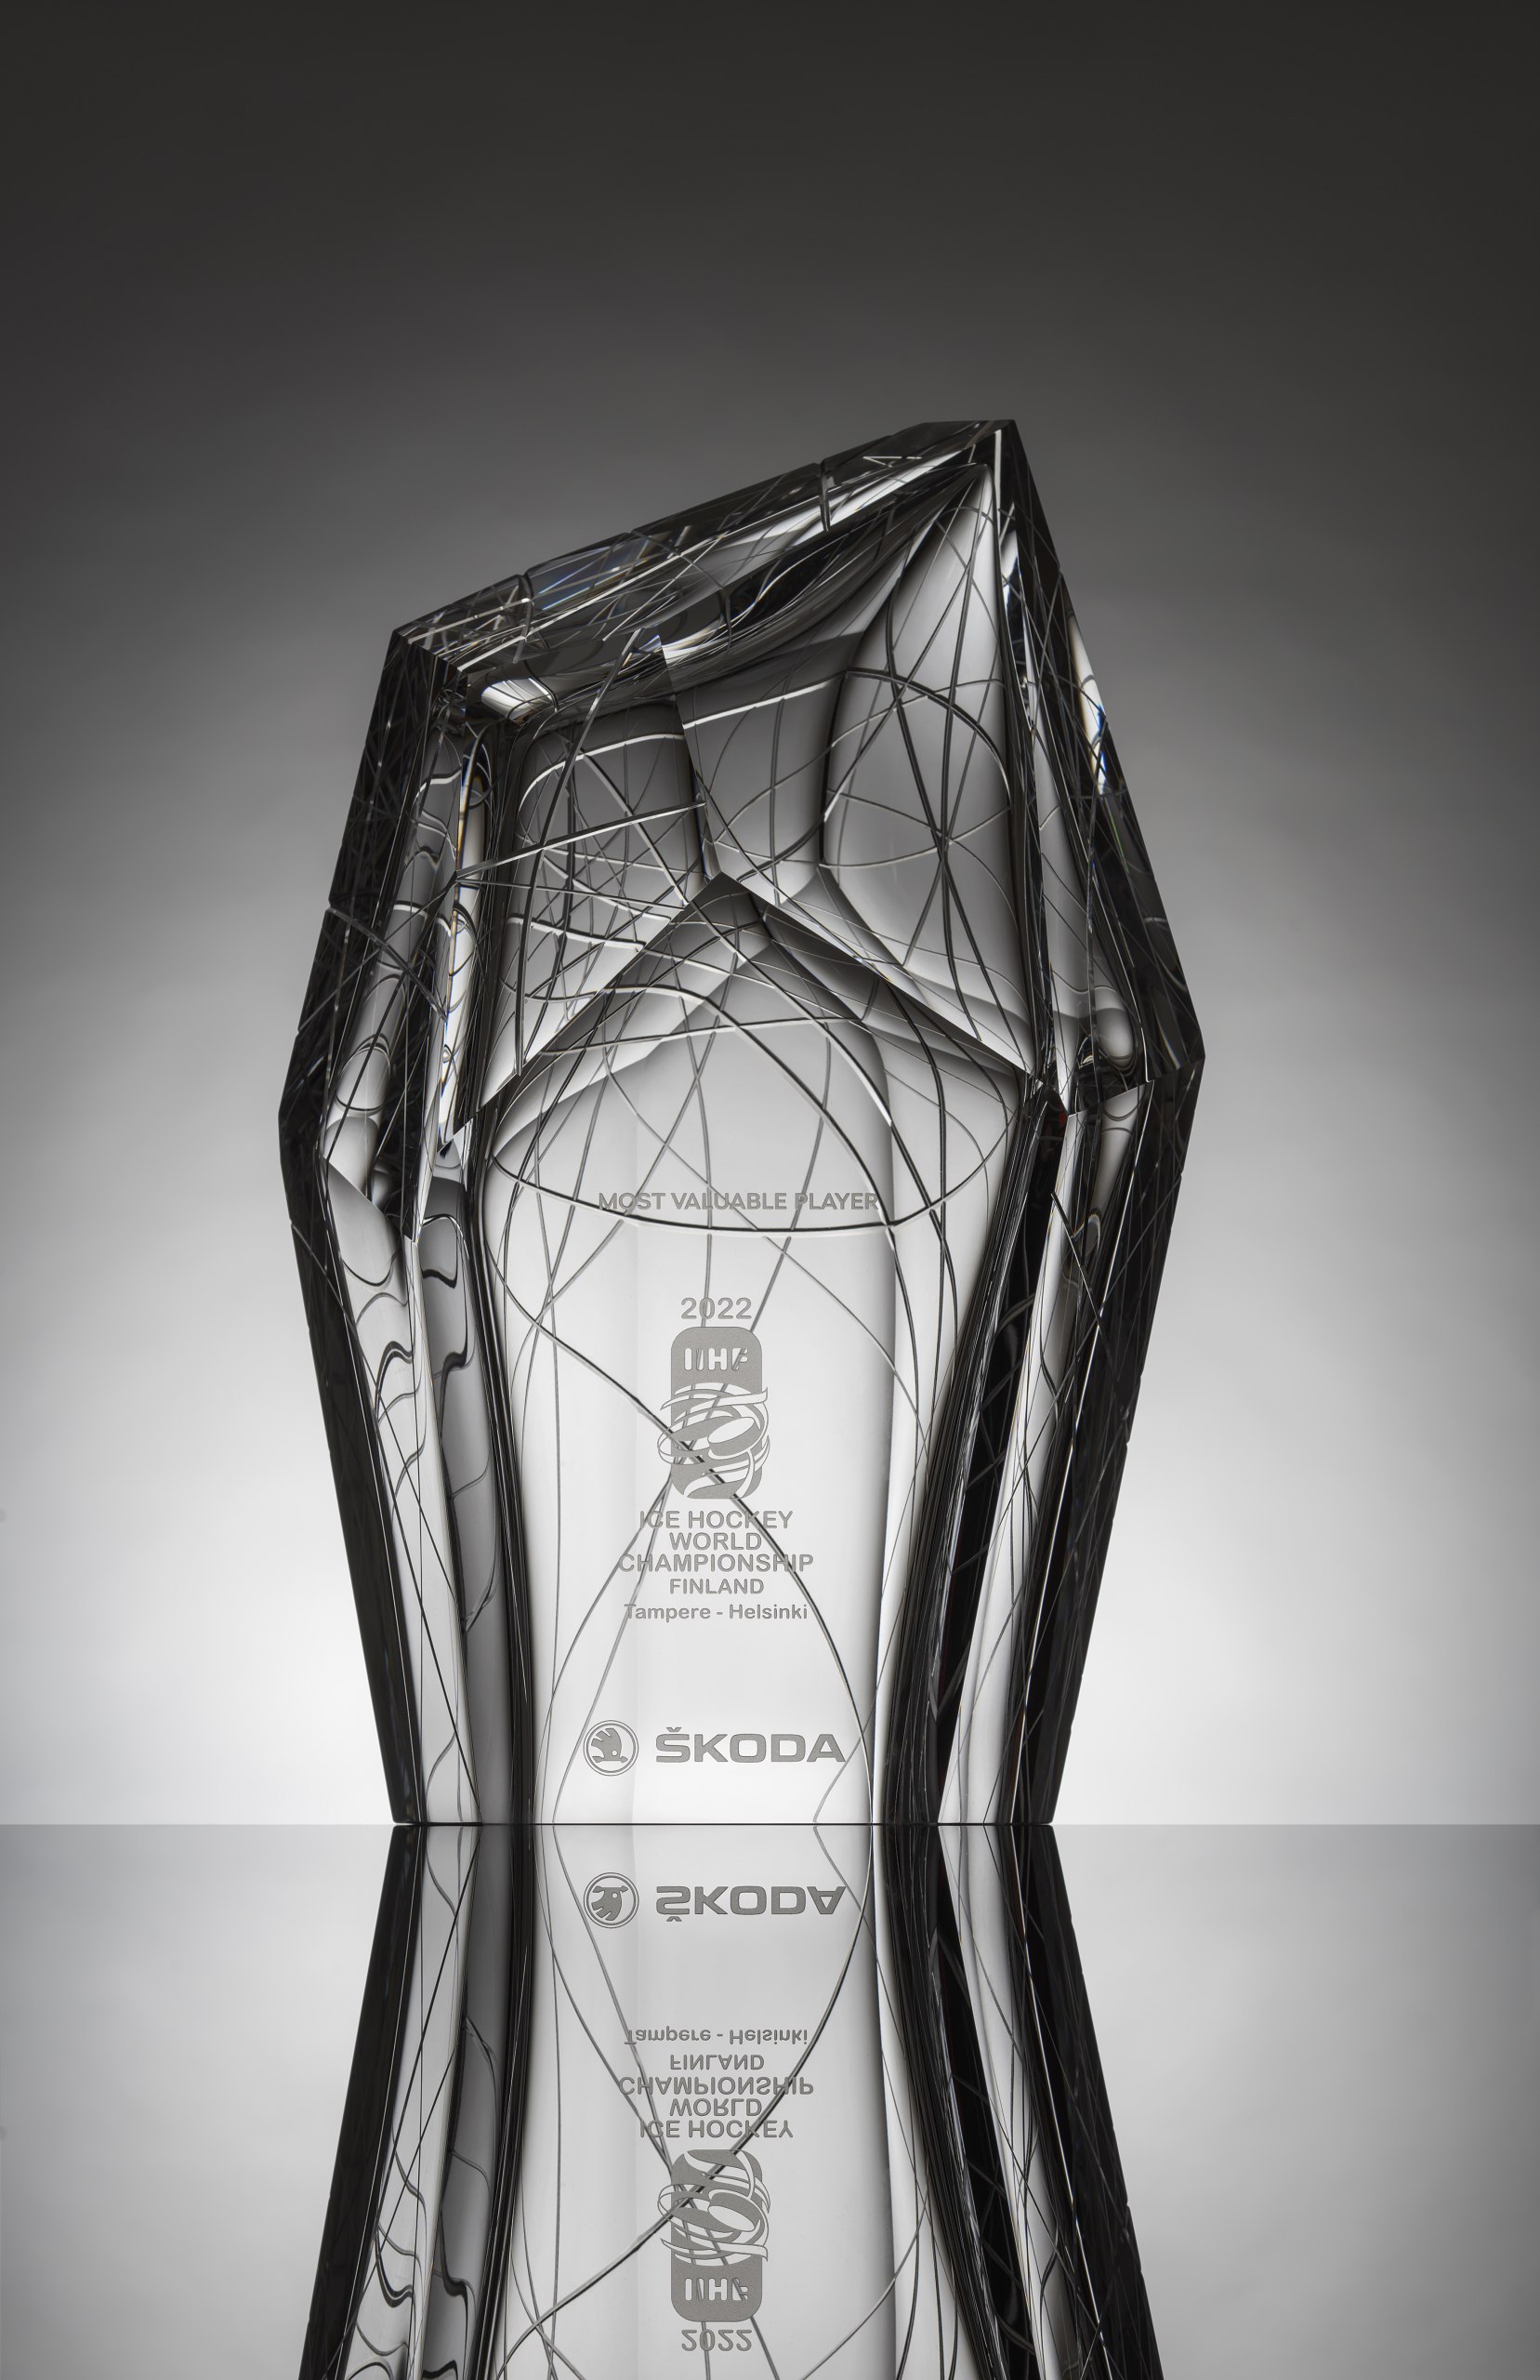 220530_Made-by-SKODA-Design-Trophy-for-the-MVP-of-the-2022-IIHF-Ice-Hockey-World-Championship-2-1657x2560